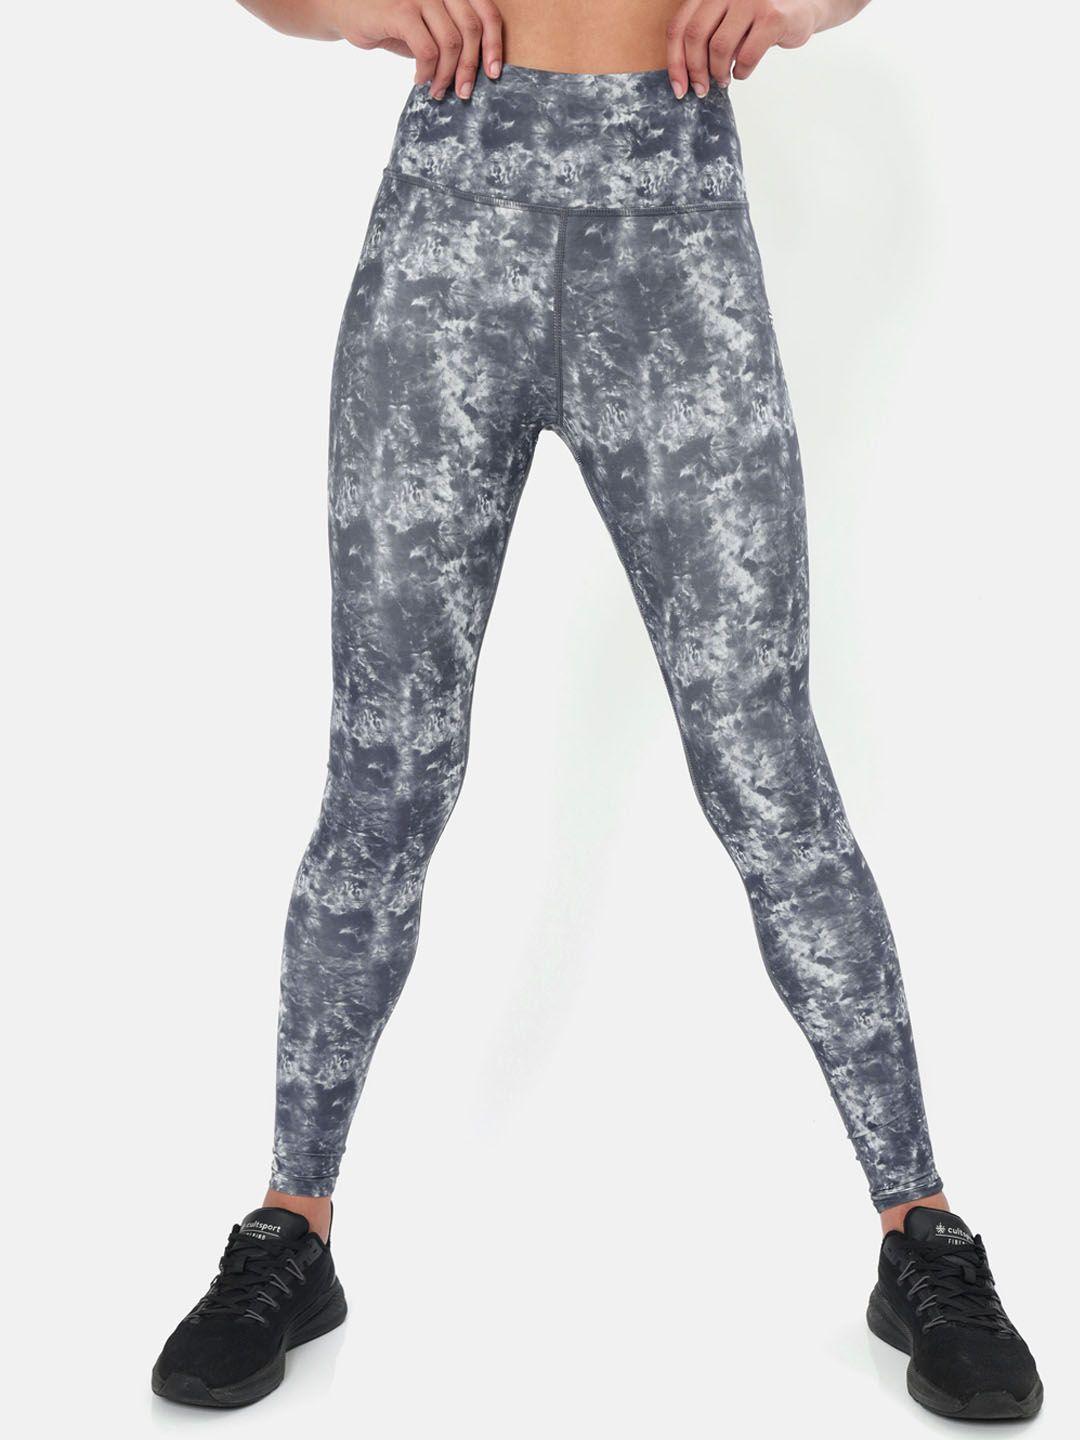 cultsport women grey & white printed absolute fit sports tights